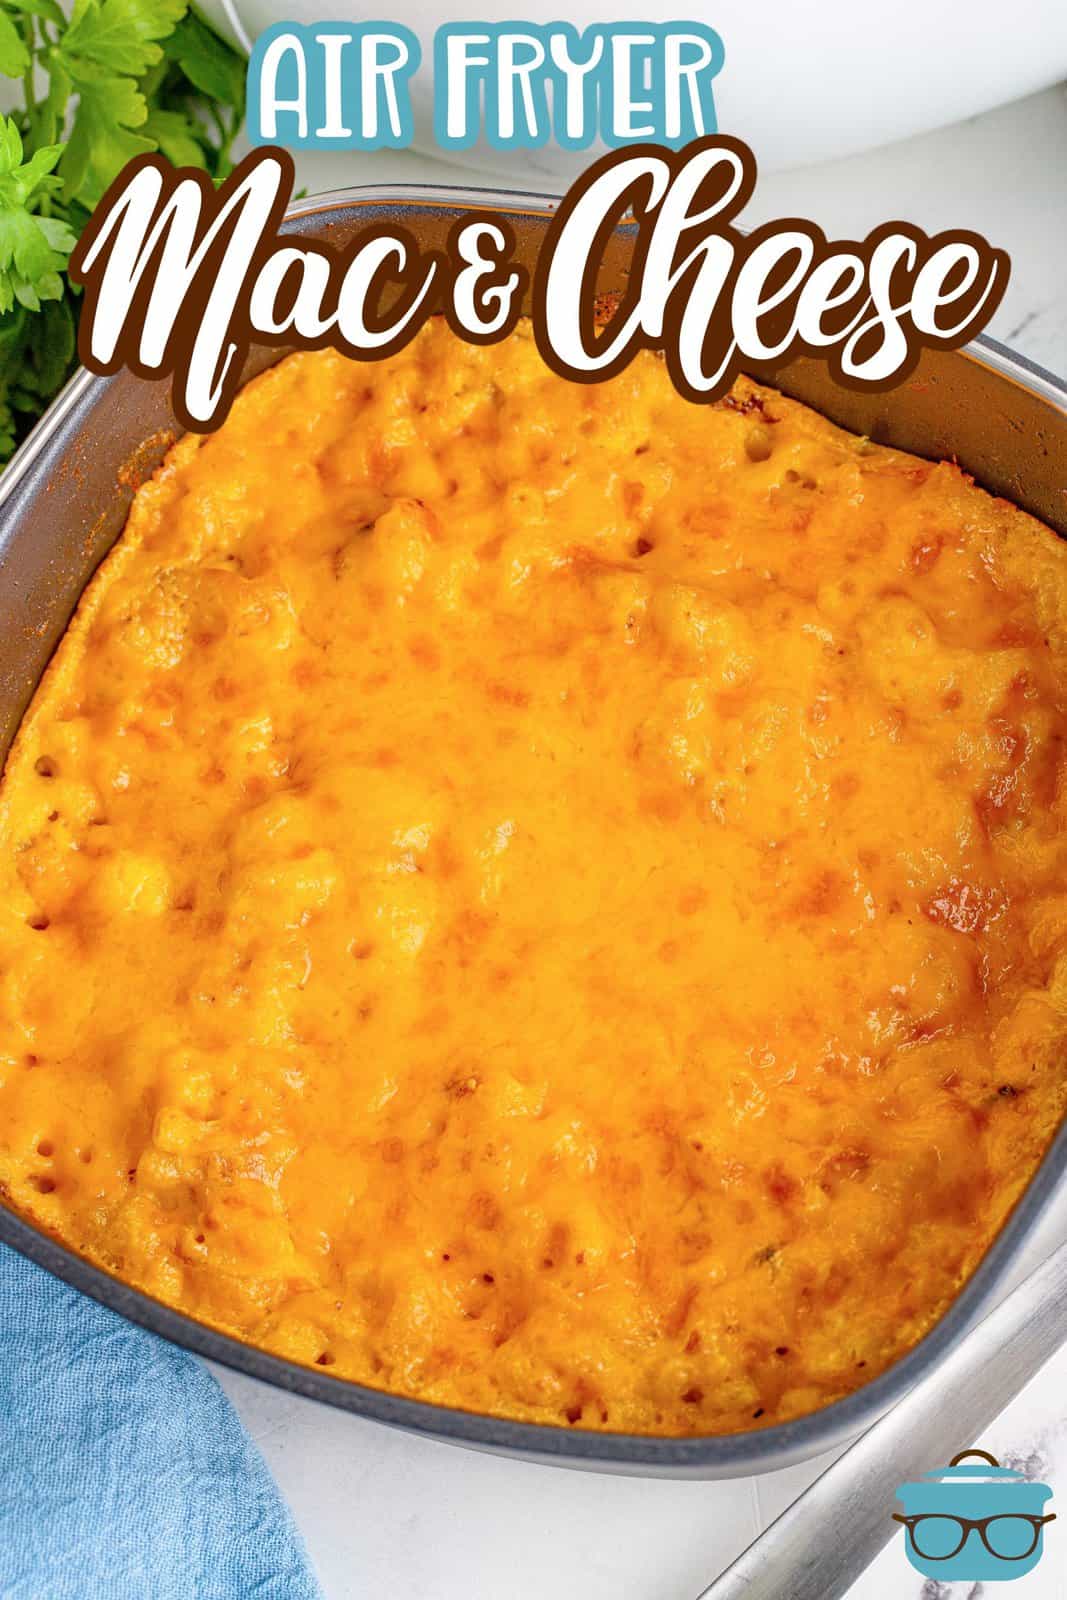 Overhead photo of finished Air Fryer Mac and Cheese in baking pan Pinterest image.